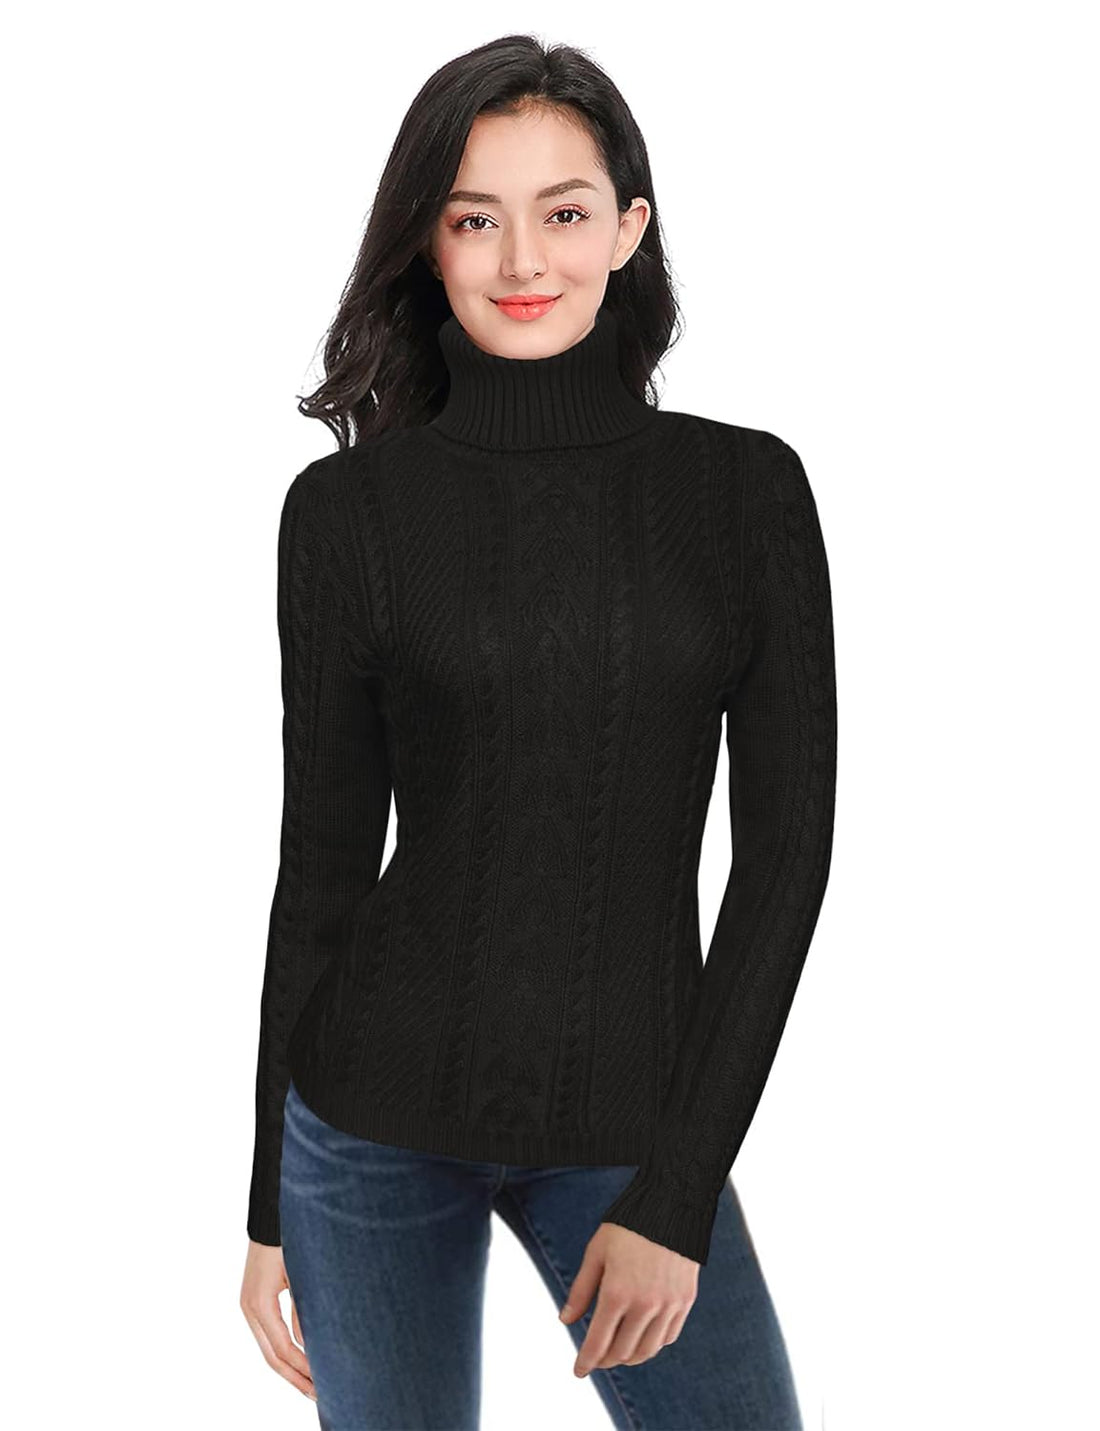 v28 Women Polo Neck Long Slim Fitted Dress Bodycon Turtleneck Cable Knit Sweater, Y Black, Large